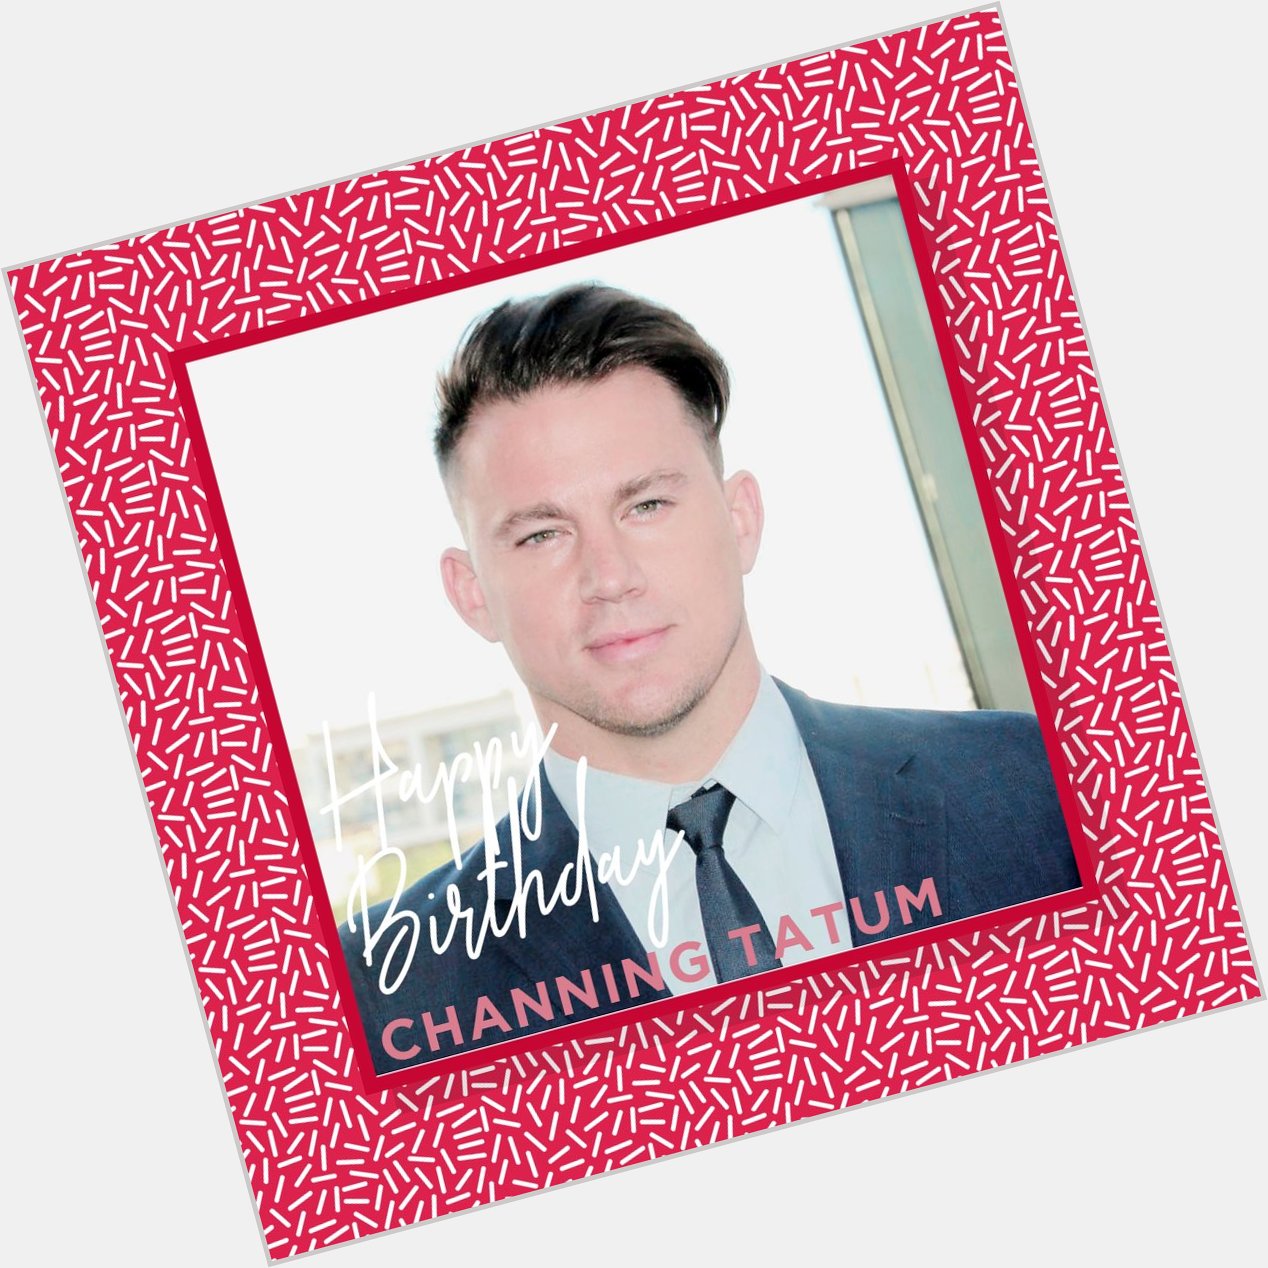 Happy birthday, Channing Tatum! The handsome and multi-talented actor turns 38 today! 